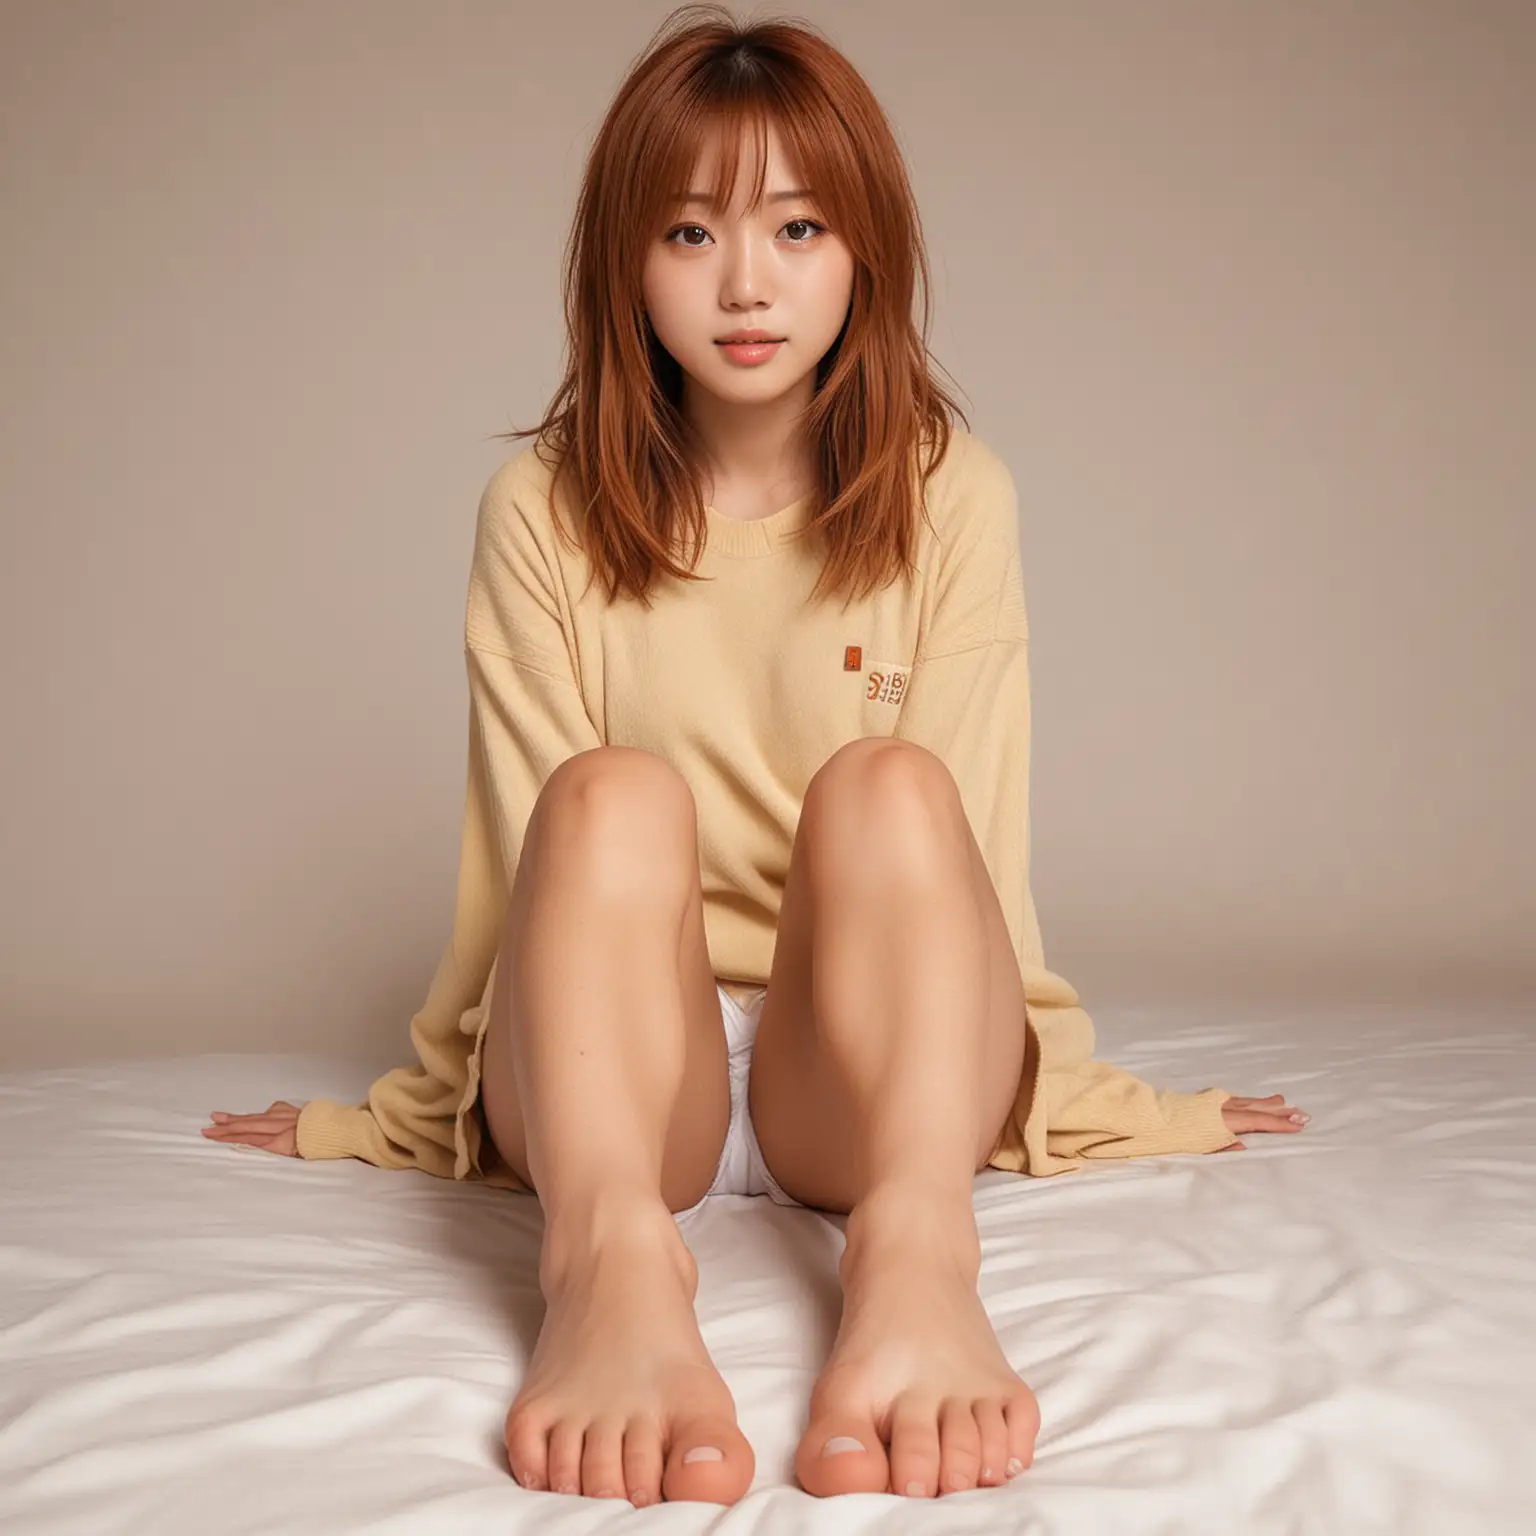 CaramelHaired Japanese Girl with Freckles and Amber Eyes Displaying Her Feet